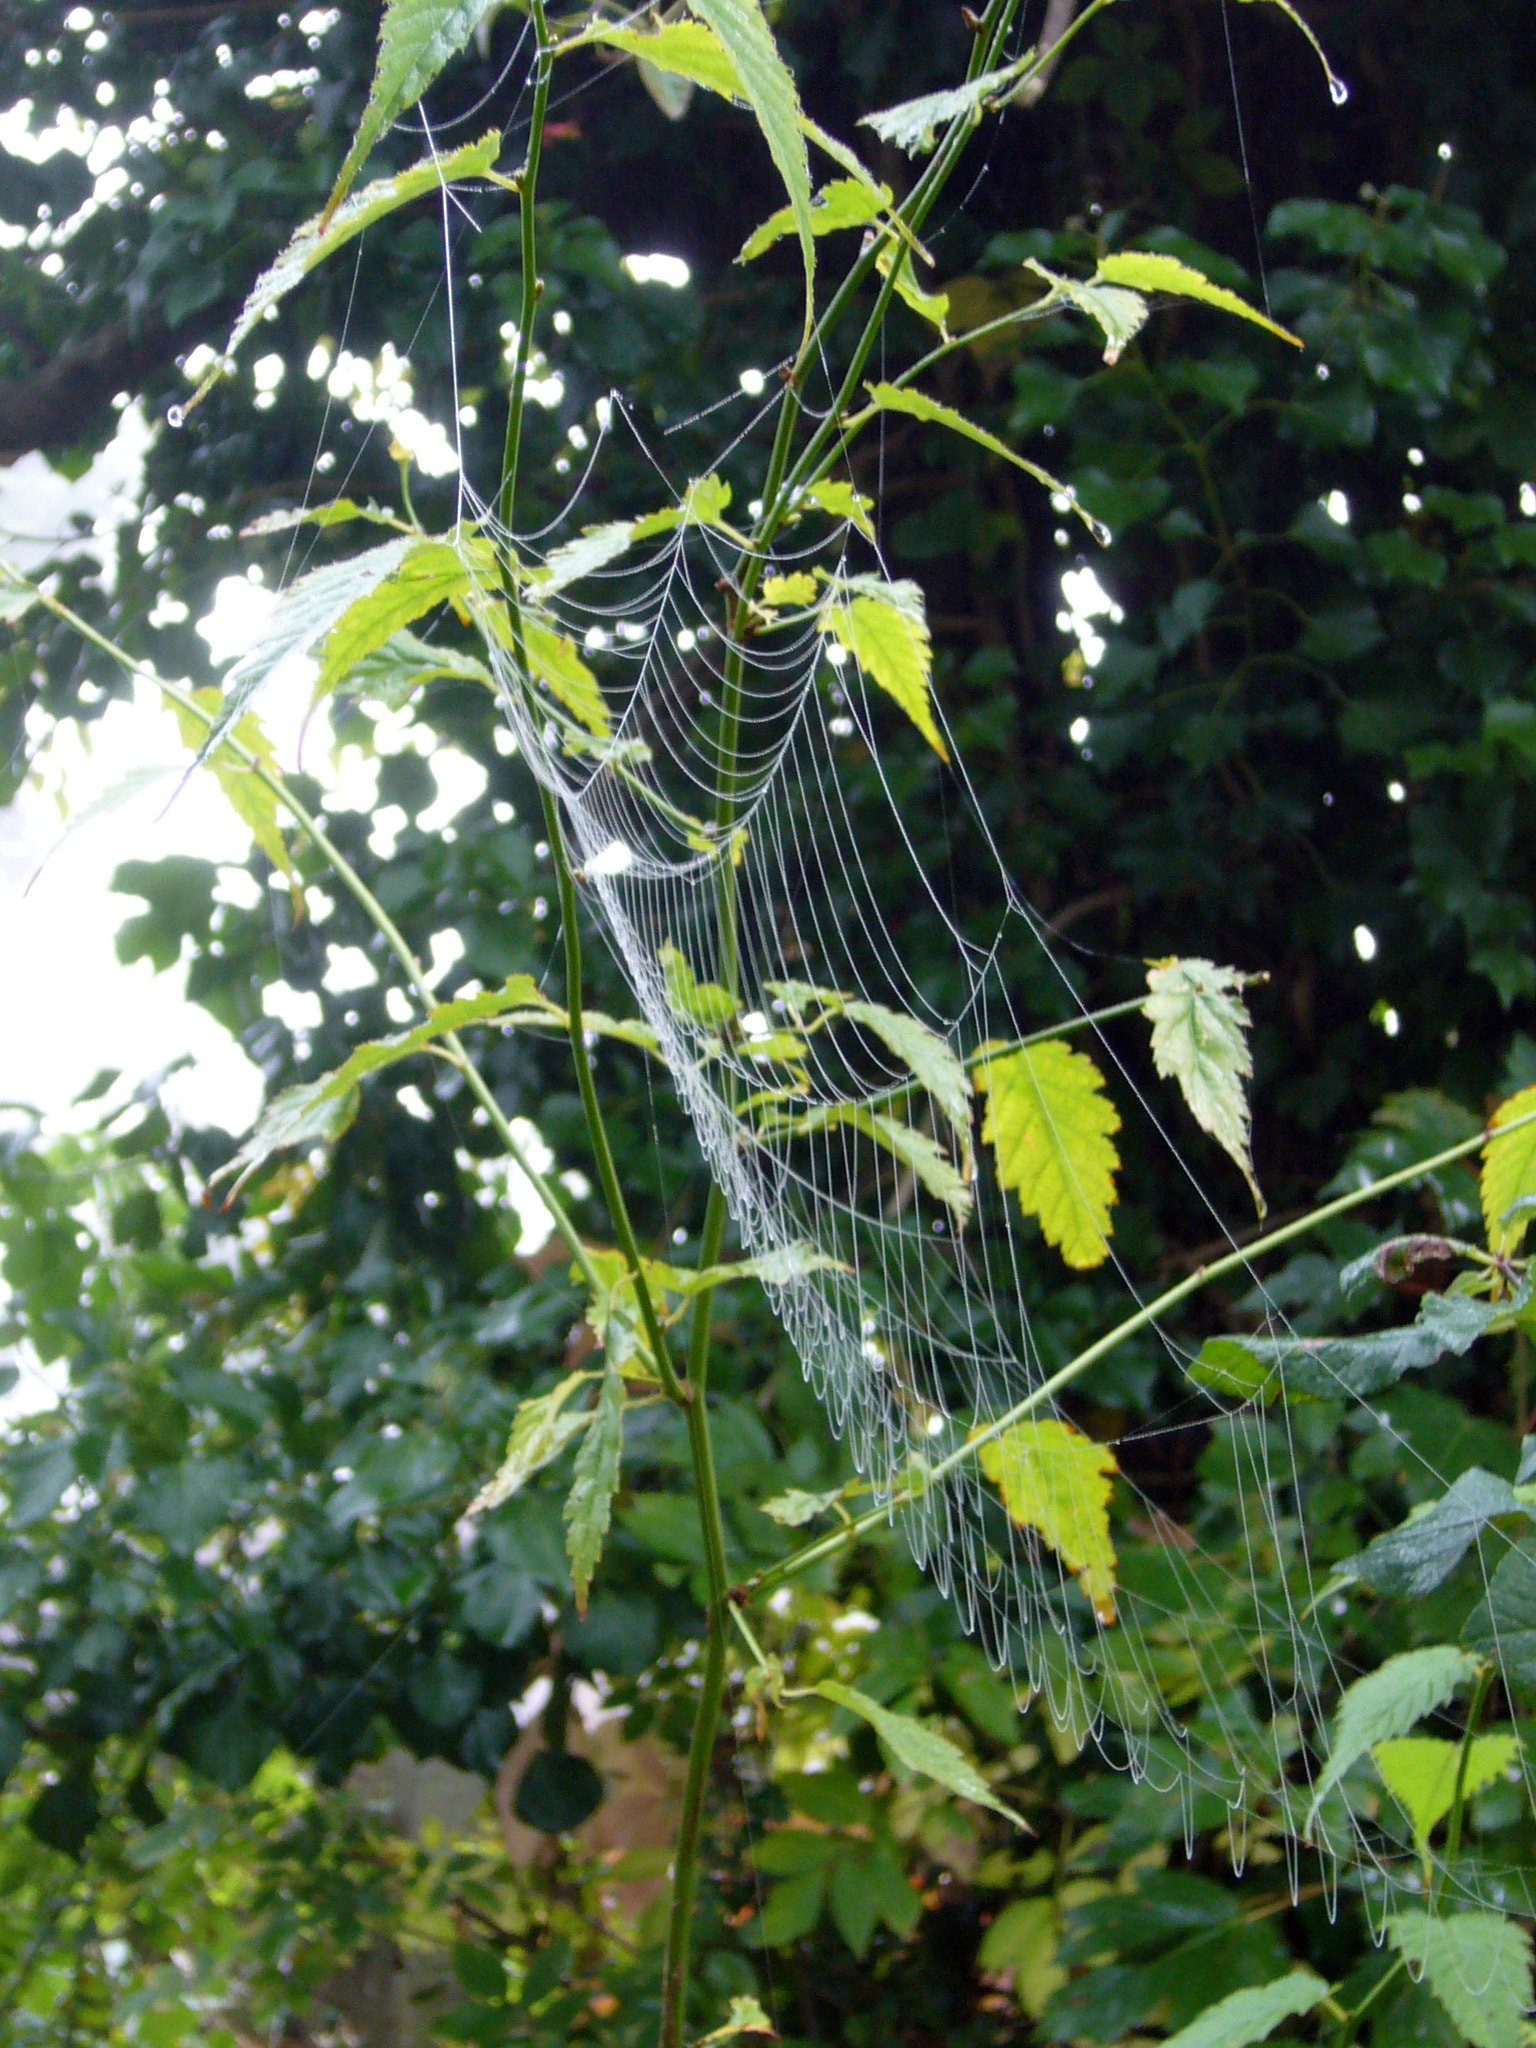 Panasonic DMC-FX9 sample photo. Spiders come out in the autumn photography